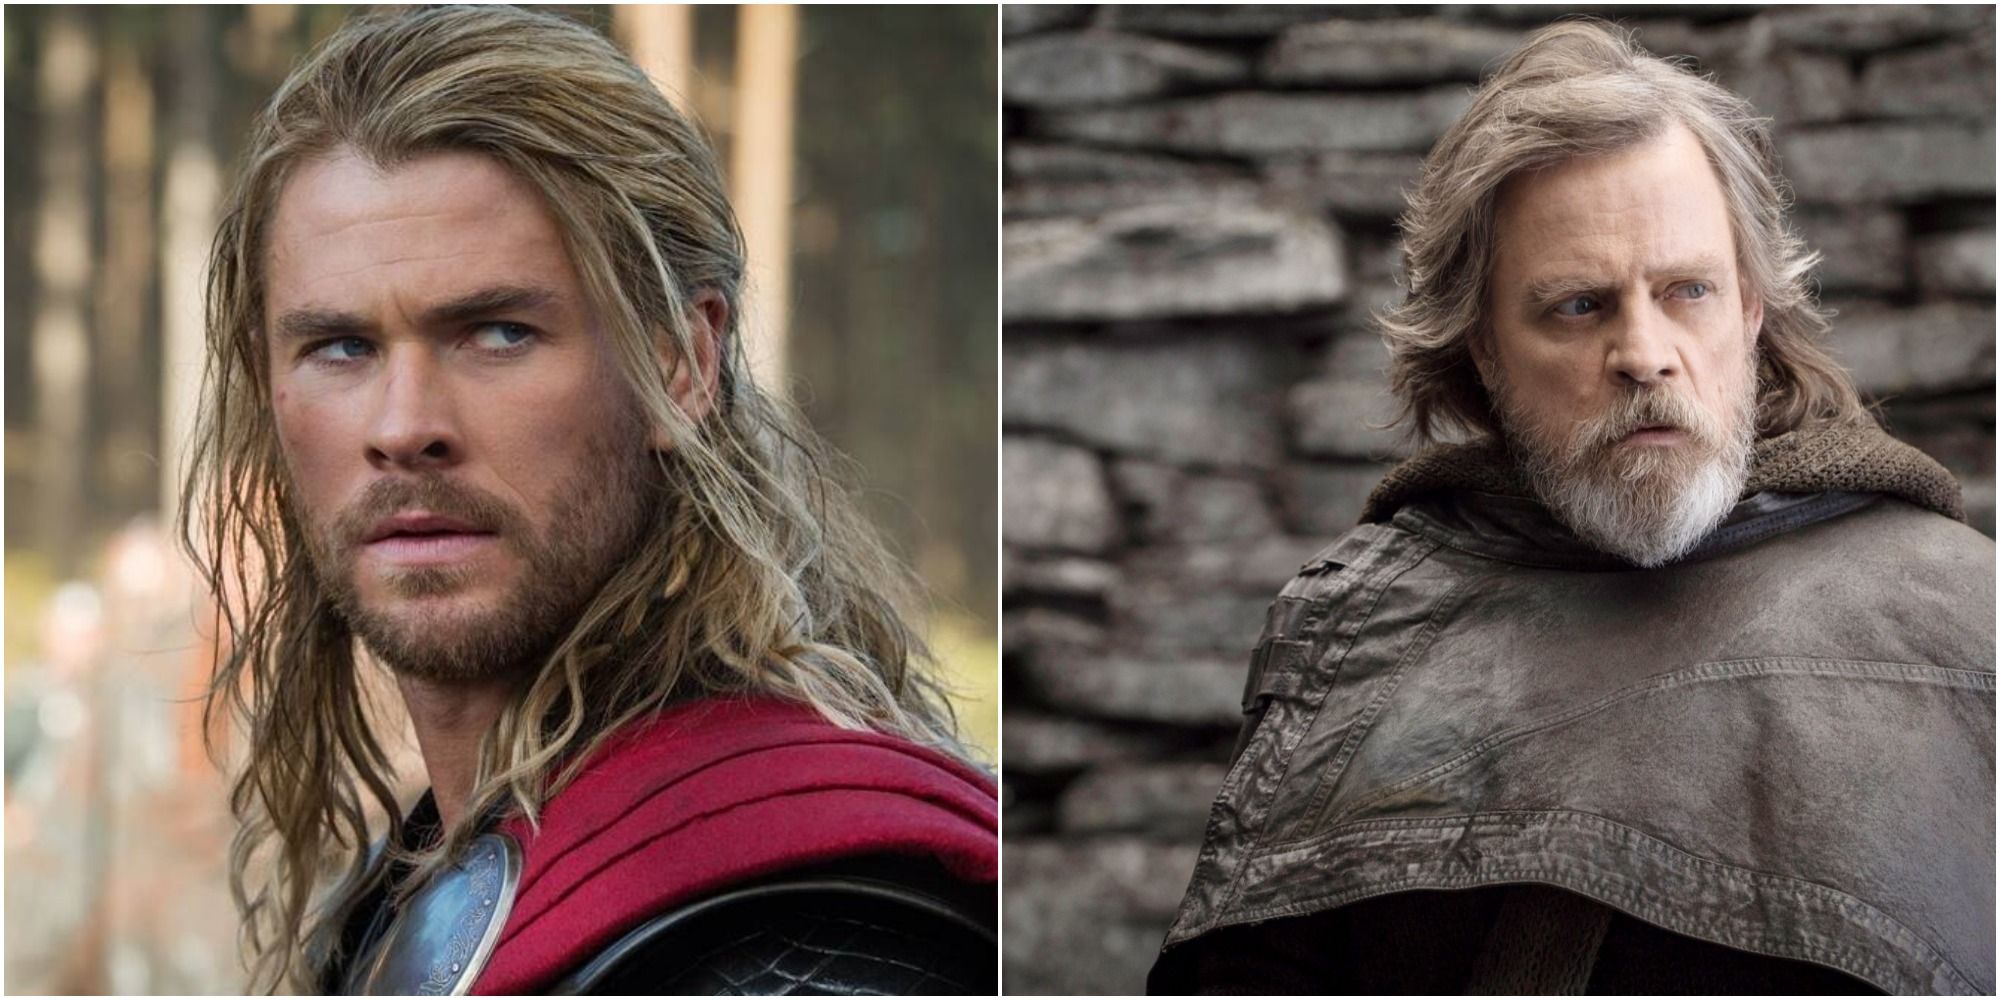 Chris Hemsworth and Mark Hamill, started on soap operas